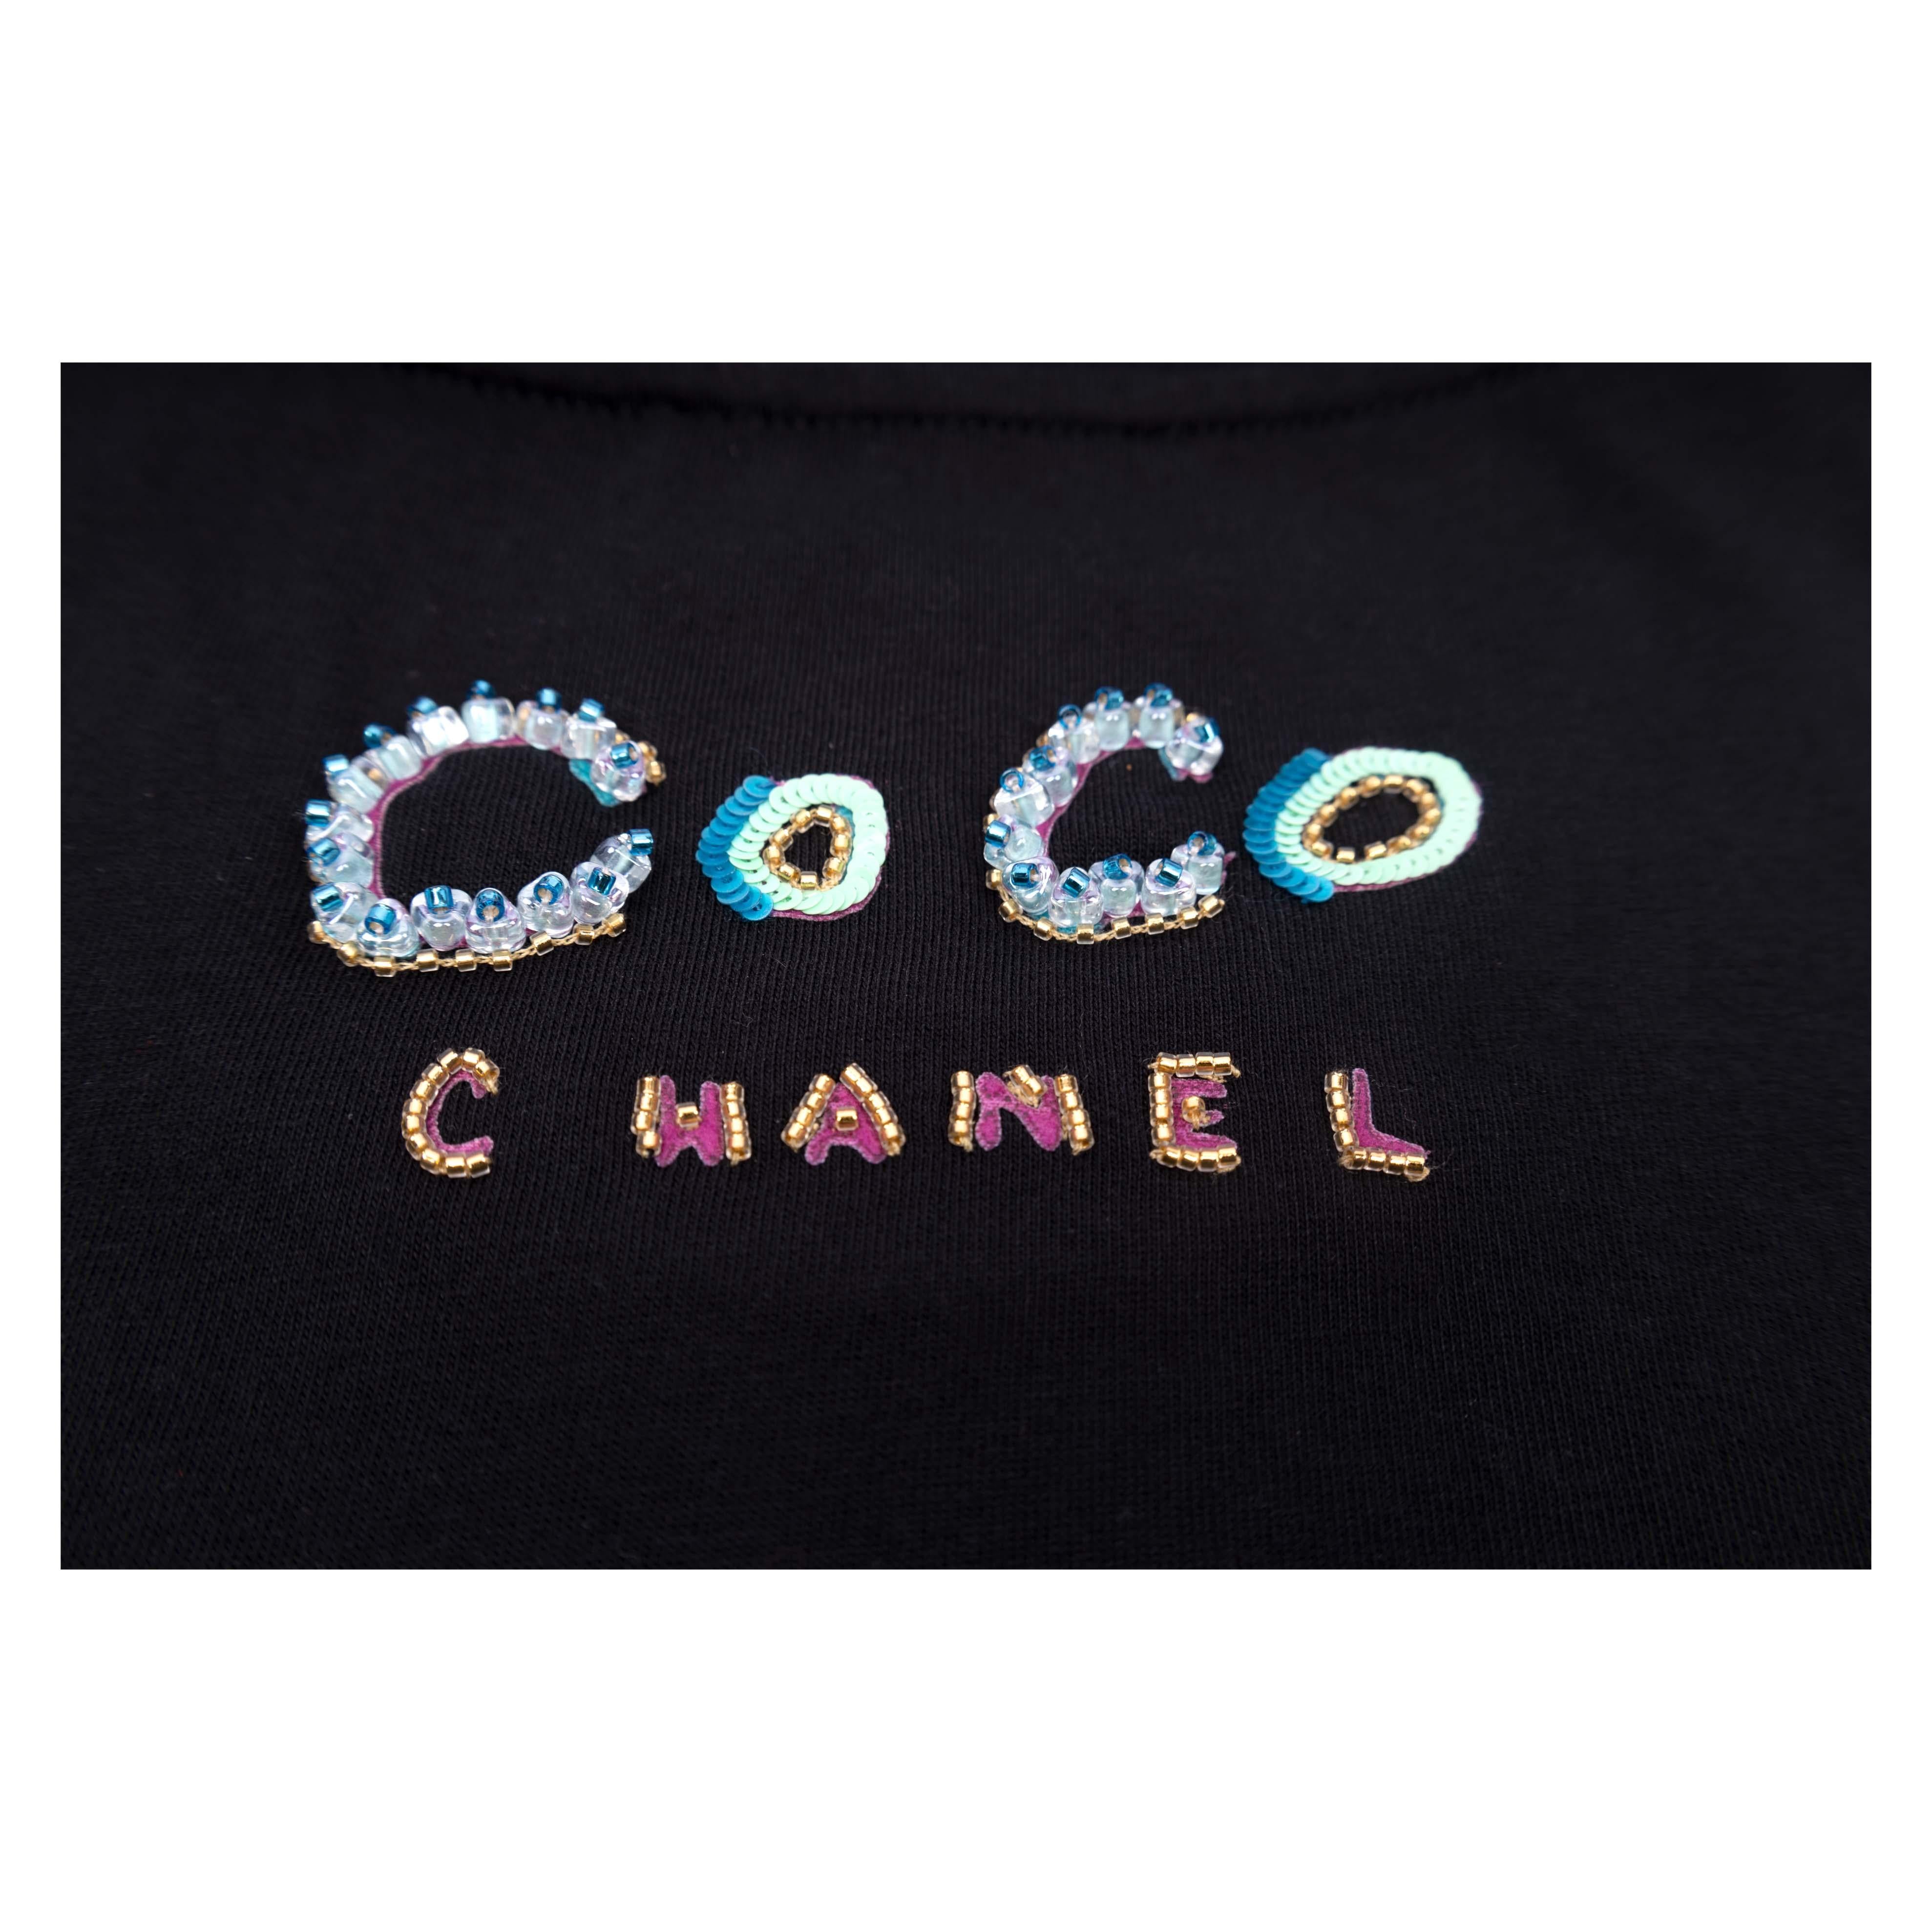 Chanel x Pharrell Black Embellished Cotton T-Shirt - '10s In Excellent Condition For Sale In Milano, IT